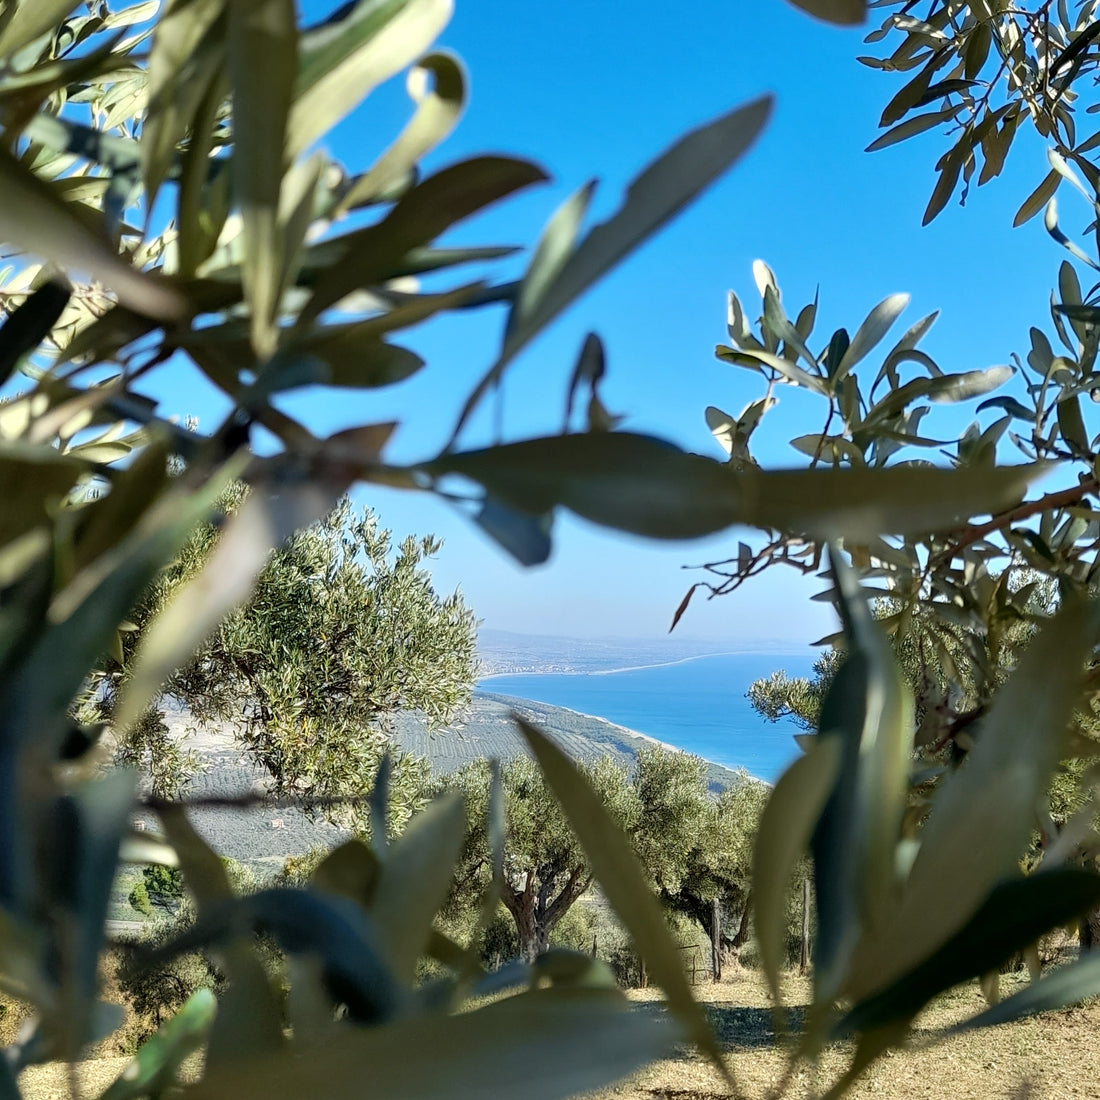 Olive trees in Italy with a view of the sea, southern Italy, Calabria, Catanzaro